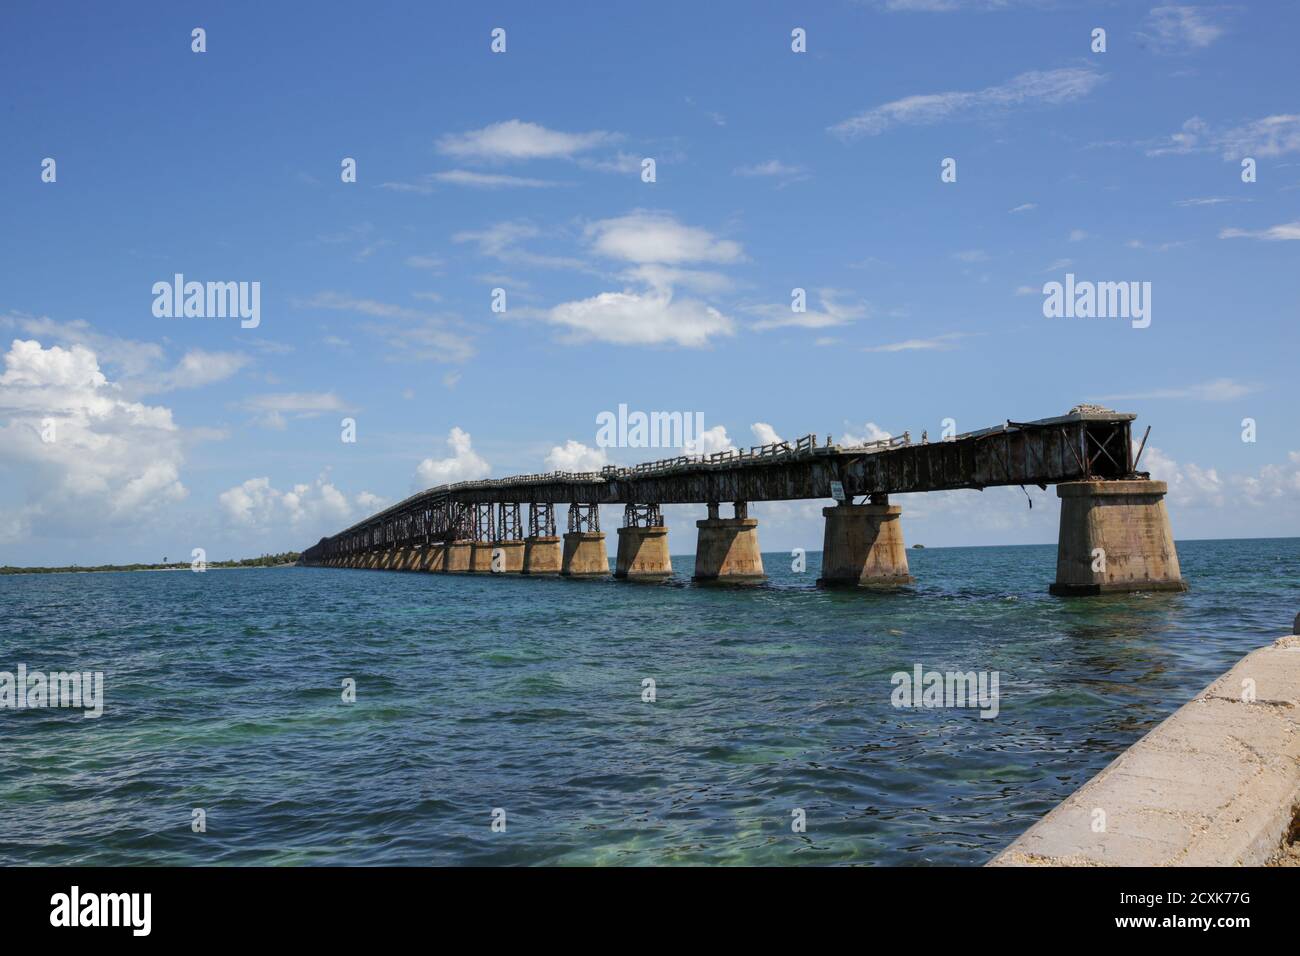 Old and new Seven Mile bridge connects the Keys to the mainland, Key West, Florida, USA Stock Photo